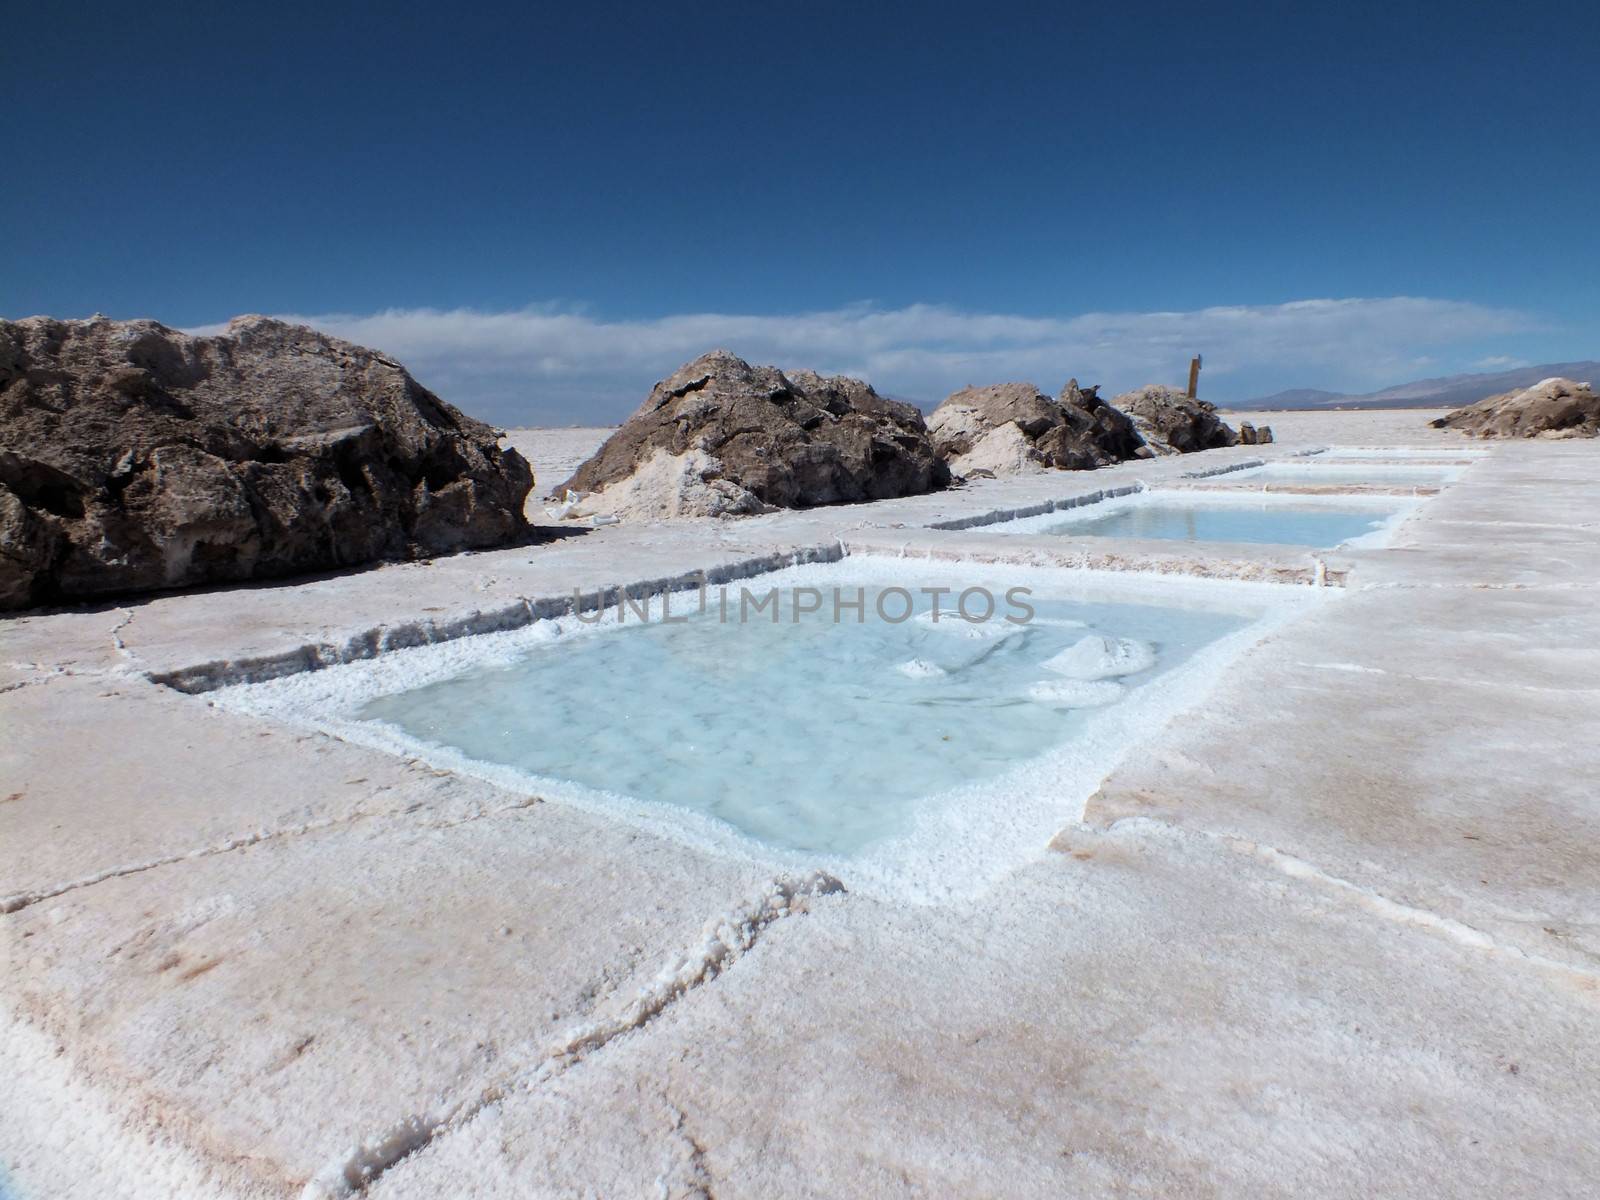 The Salinas Grandes area floods during the rainy season in the summer and the salt is harvested in the following winter and spring from pans such as these